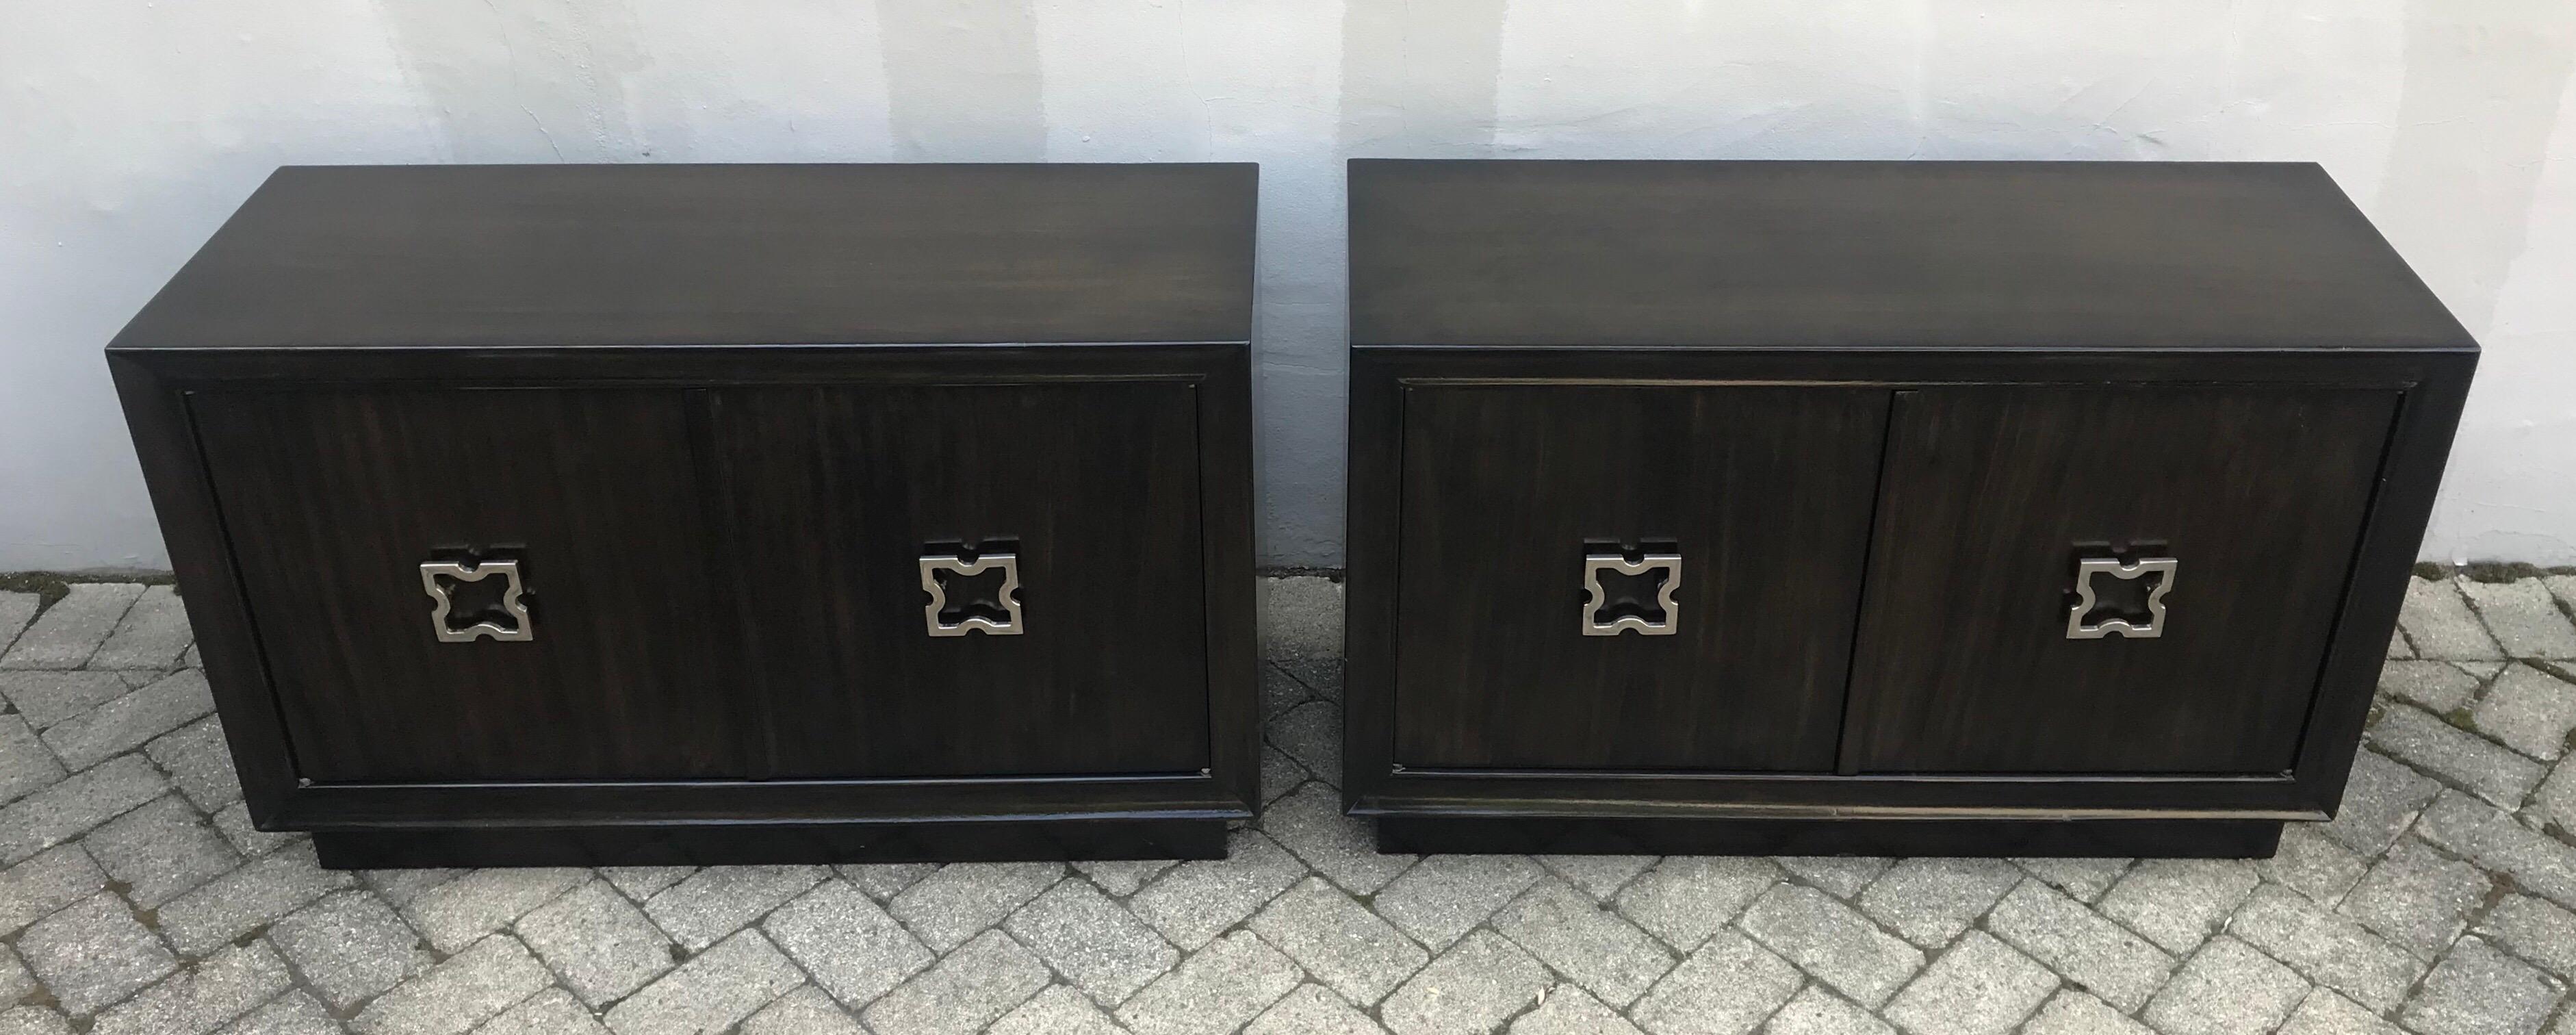 Pair of Mid-Century Modern Tommi Parzinger Style Night Stands or Credenzas 2